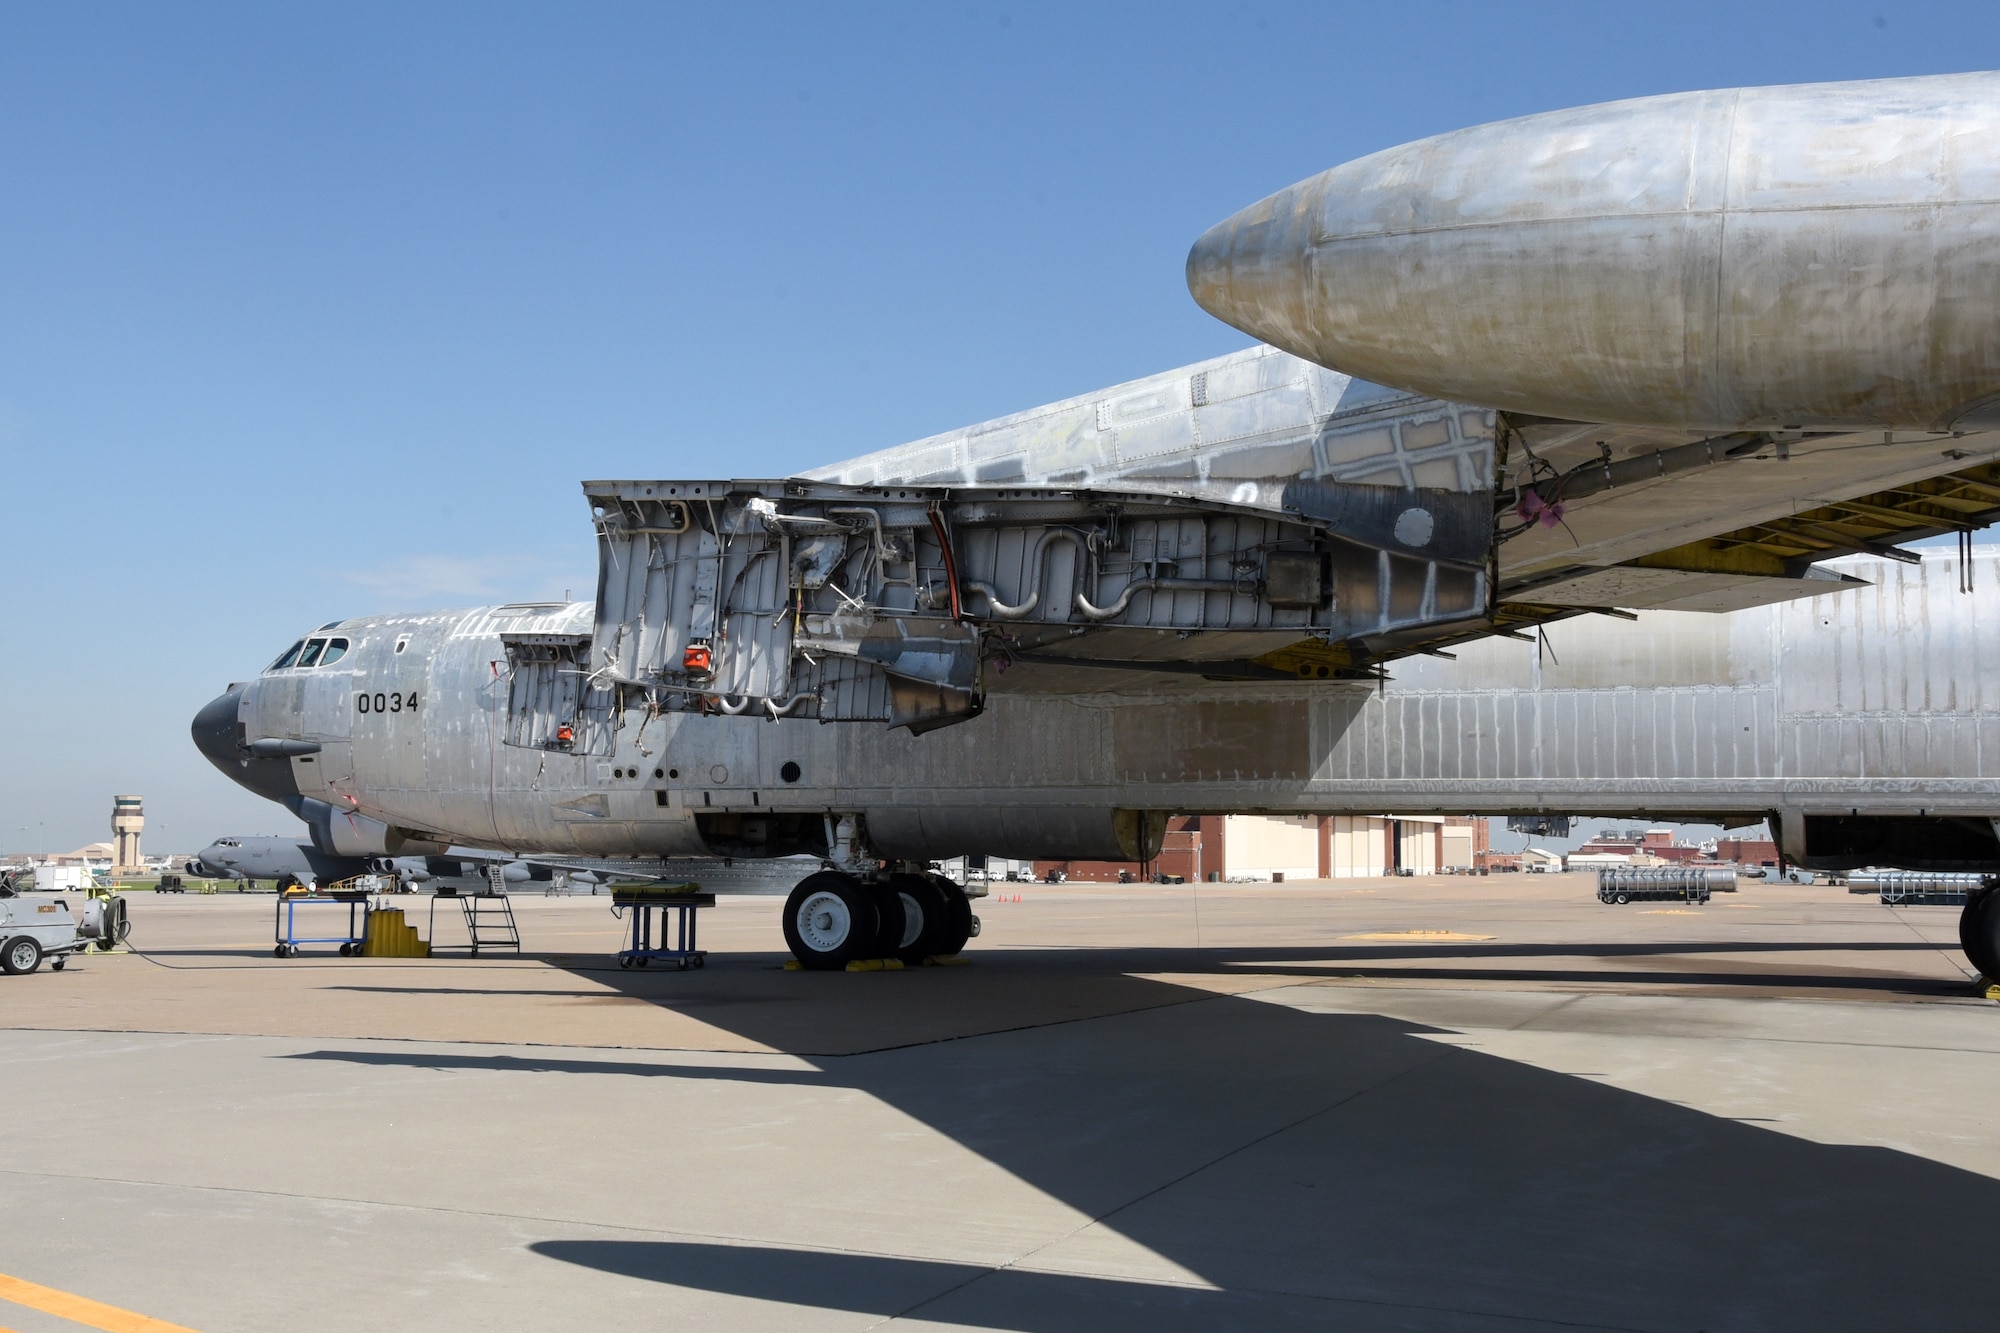 "Wise Guy," tail number 60-034, is the second B-52 Stratofortress to go through a three-phase regeneration process to return to service. "Ghost Rider," tail number 61-007, was the first to return to service in 2015, both through efforts from the 309th Aerospace Maintenance and Regeneration Group at Davis-Monthan AFB, Arizona; Barksdale AFB, Louisiana; and the OC-ALC at Tinker. (U.S. Air Force photo/Kelly White)